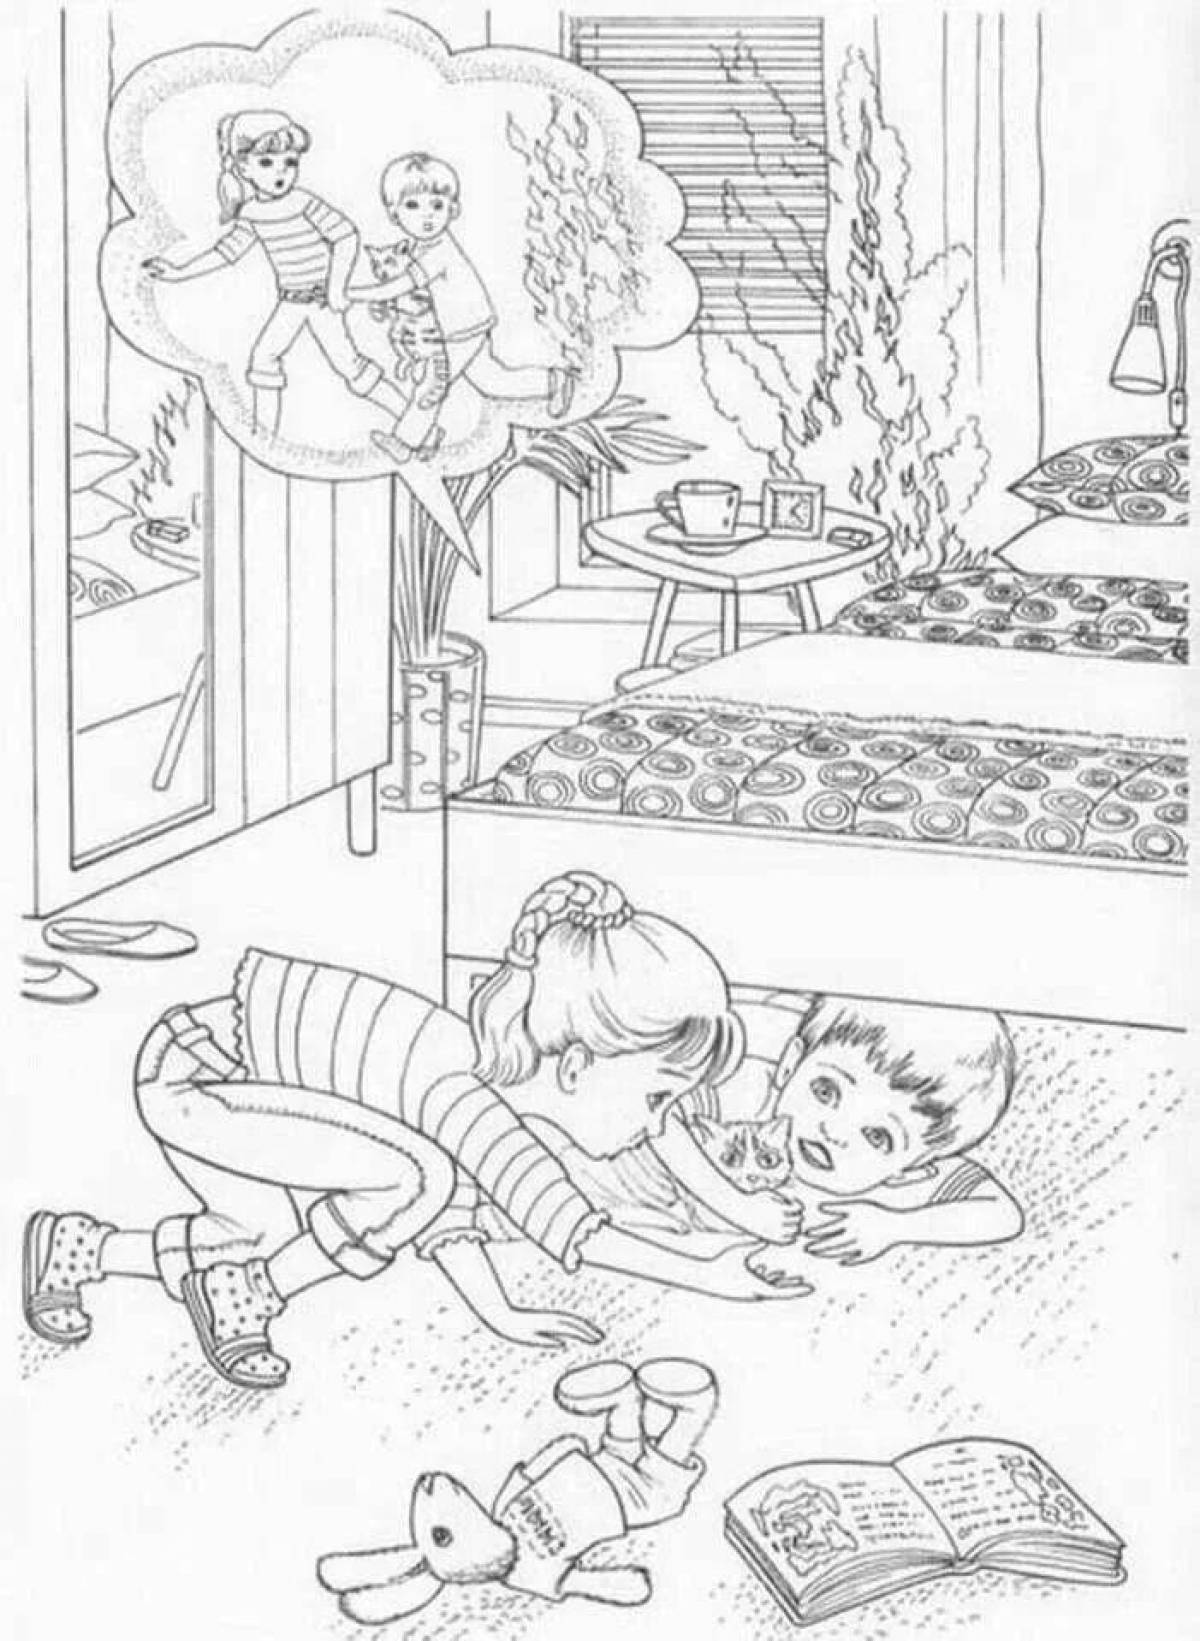 Children's safety dynamic coloring book